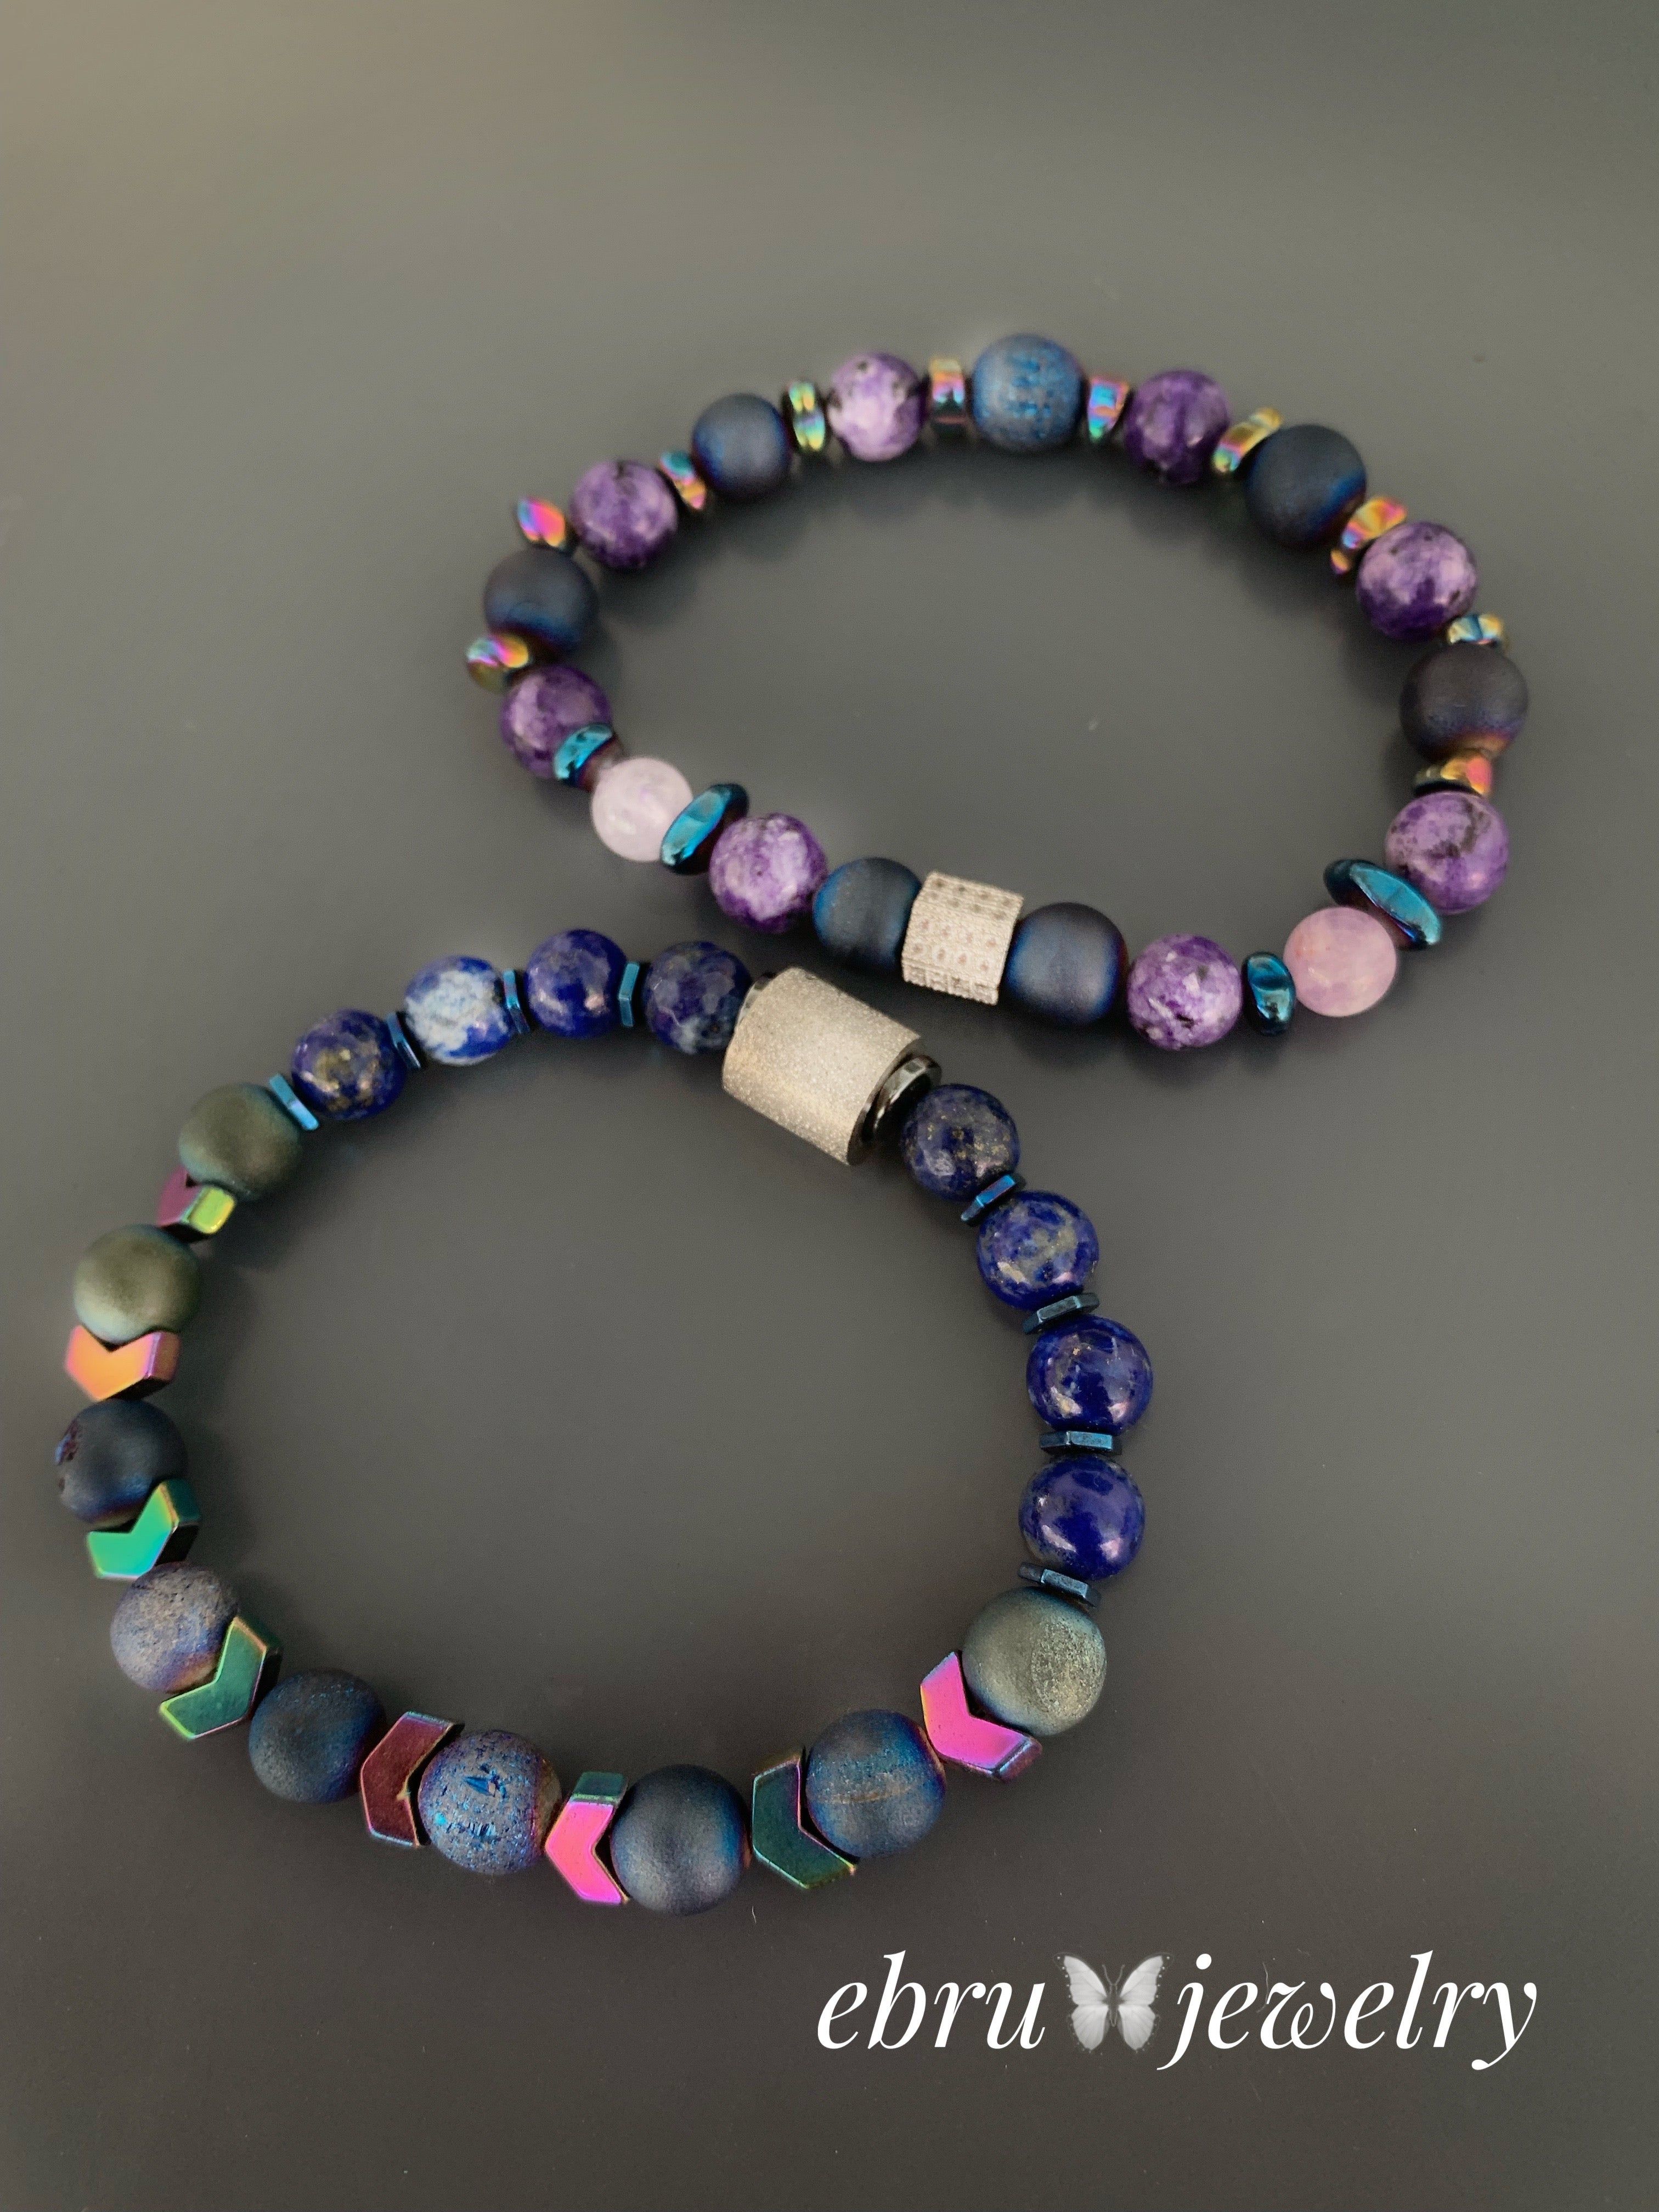 Experience the harmonious blend of colors with the Love Of Color Bracelets, handcrafted with love and attention to detail for a unique and meaningful accessory.